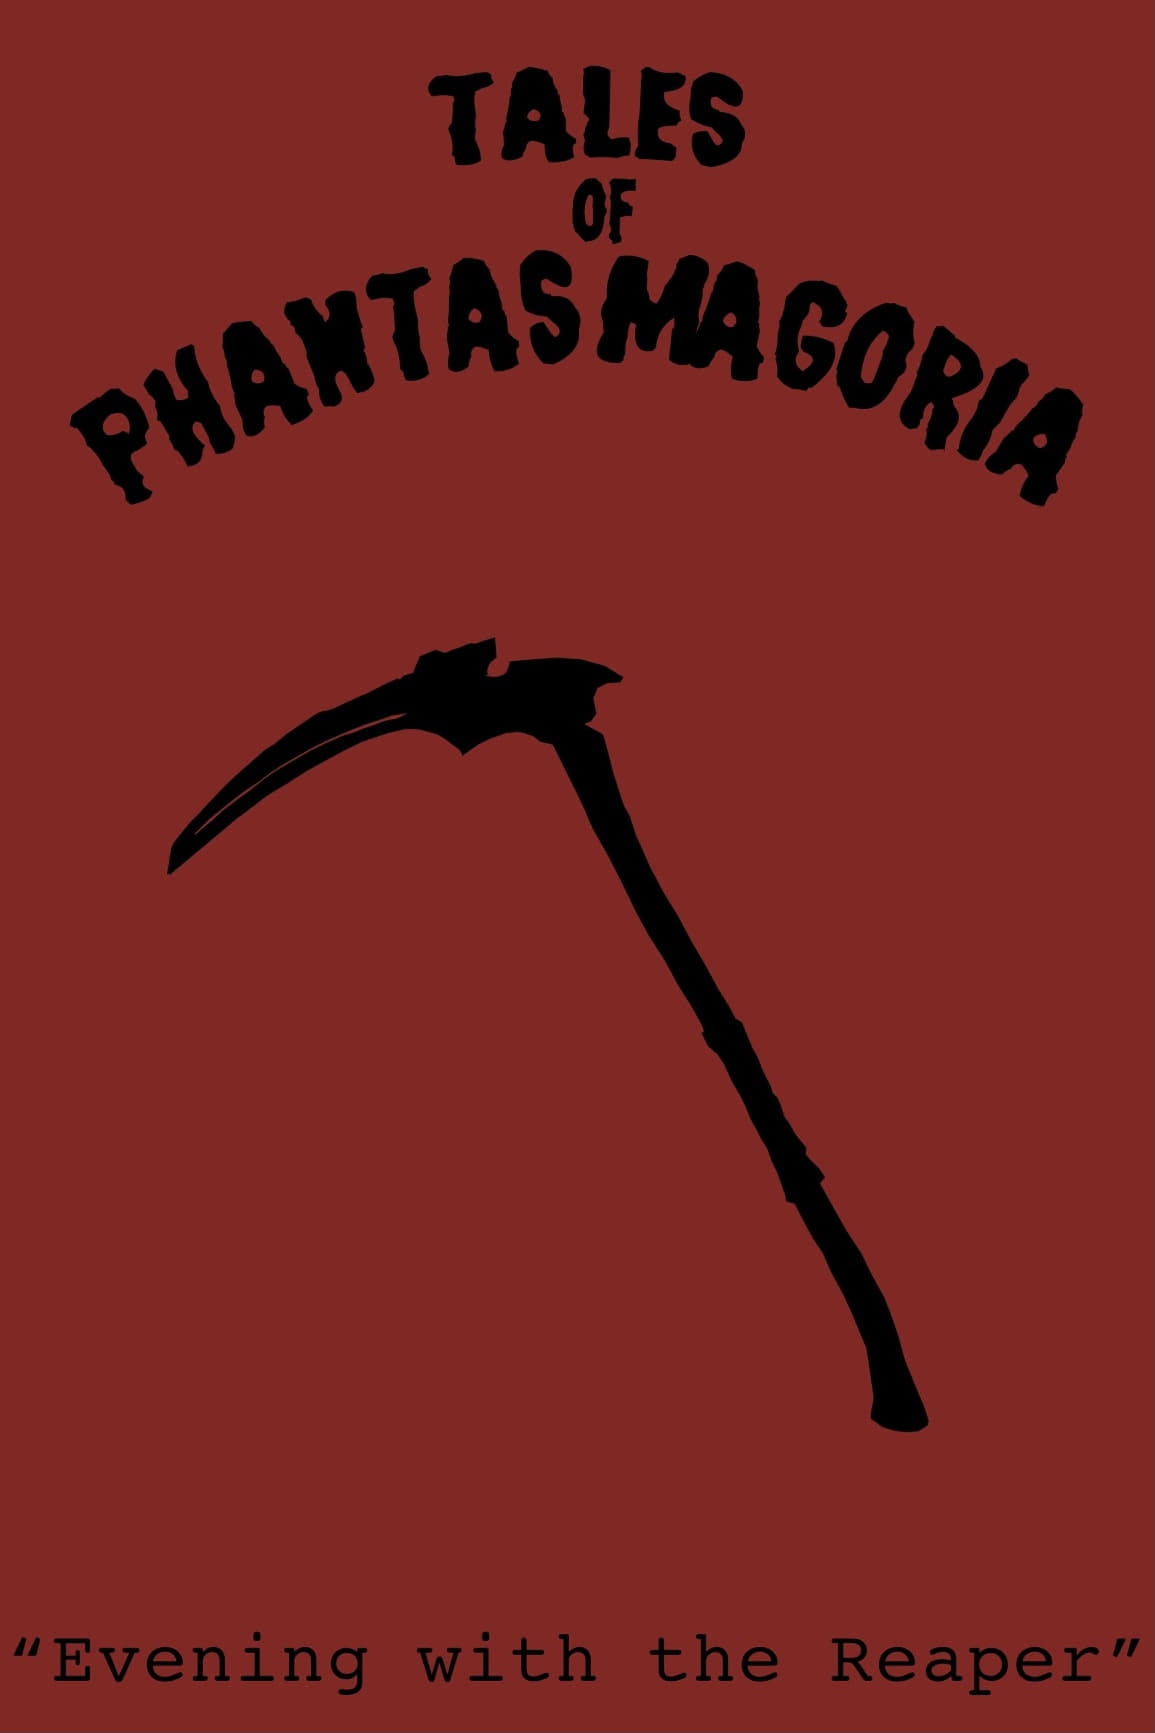 Tales of Phantasmagoria: Evening with the Reaper